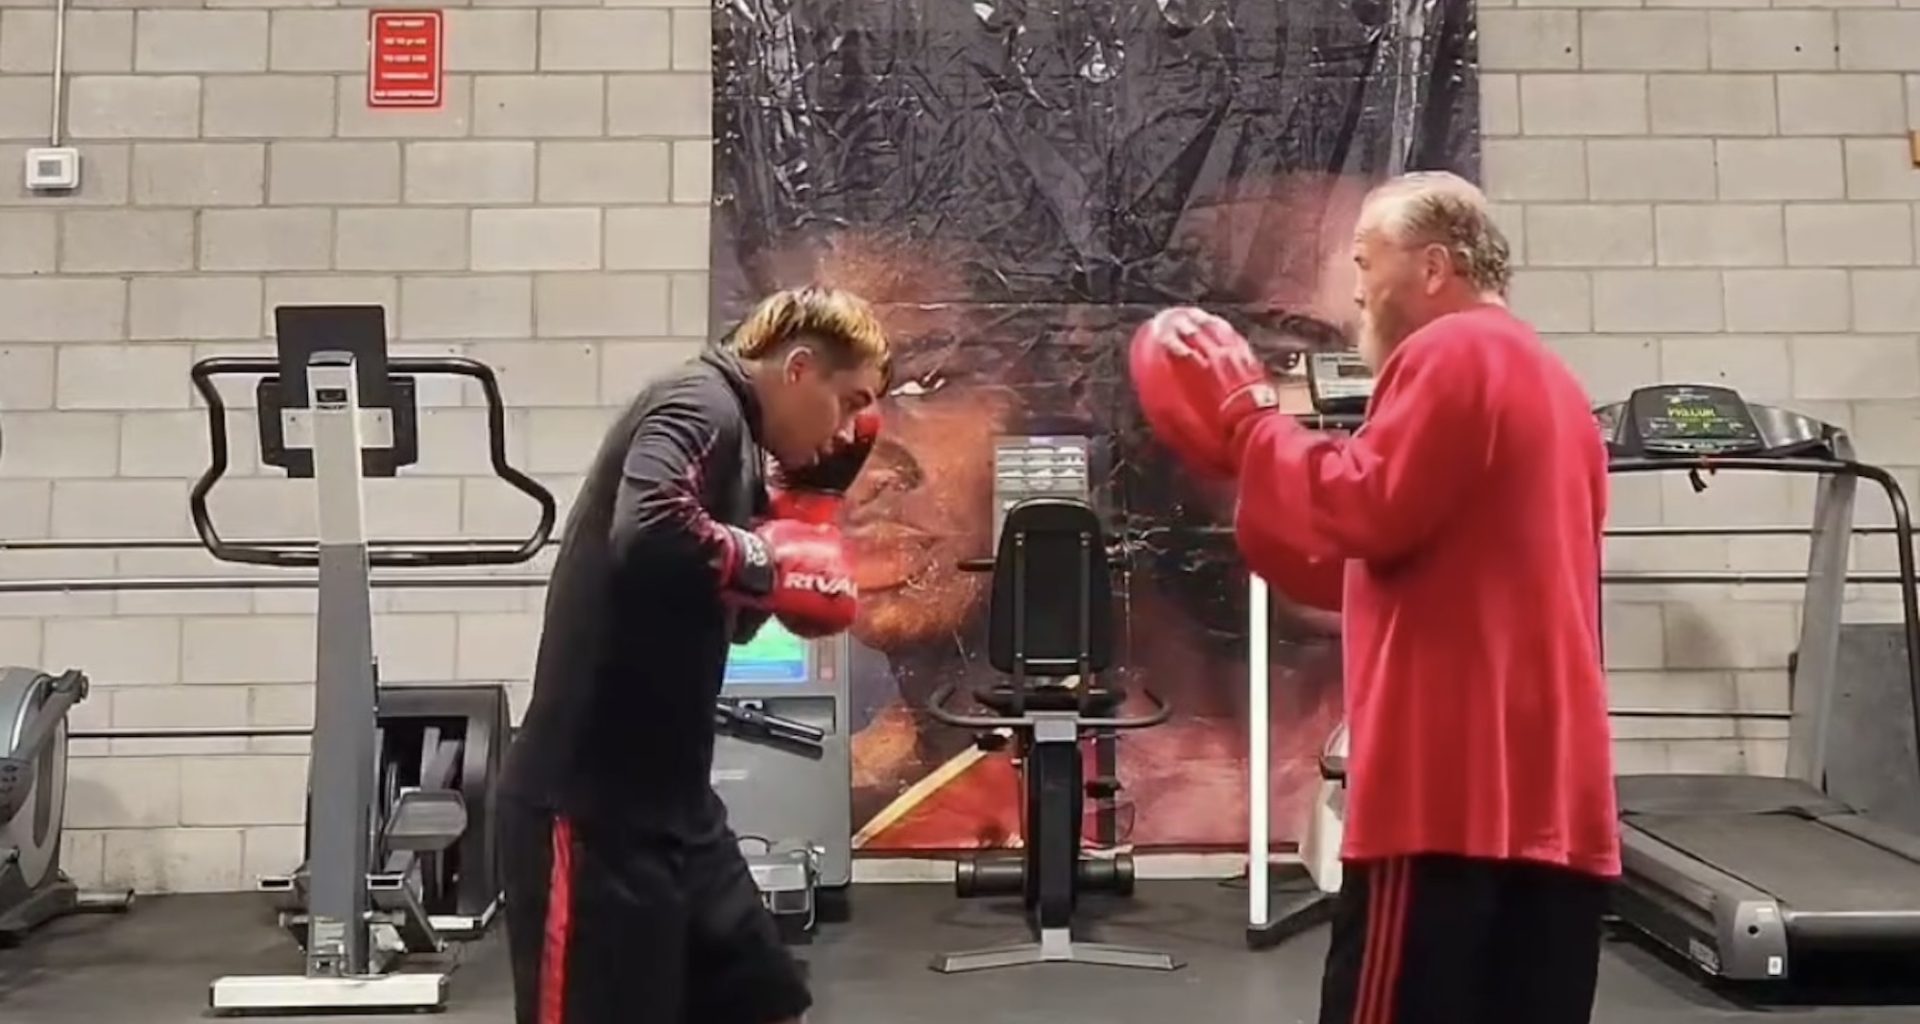 Man gains stability in pursuit of boxing dream with help of The Salvation Army